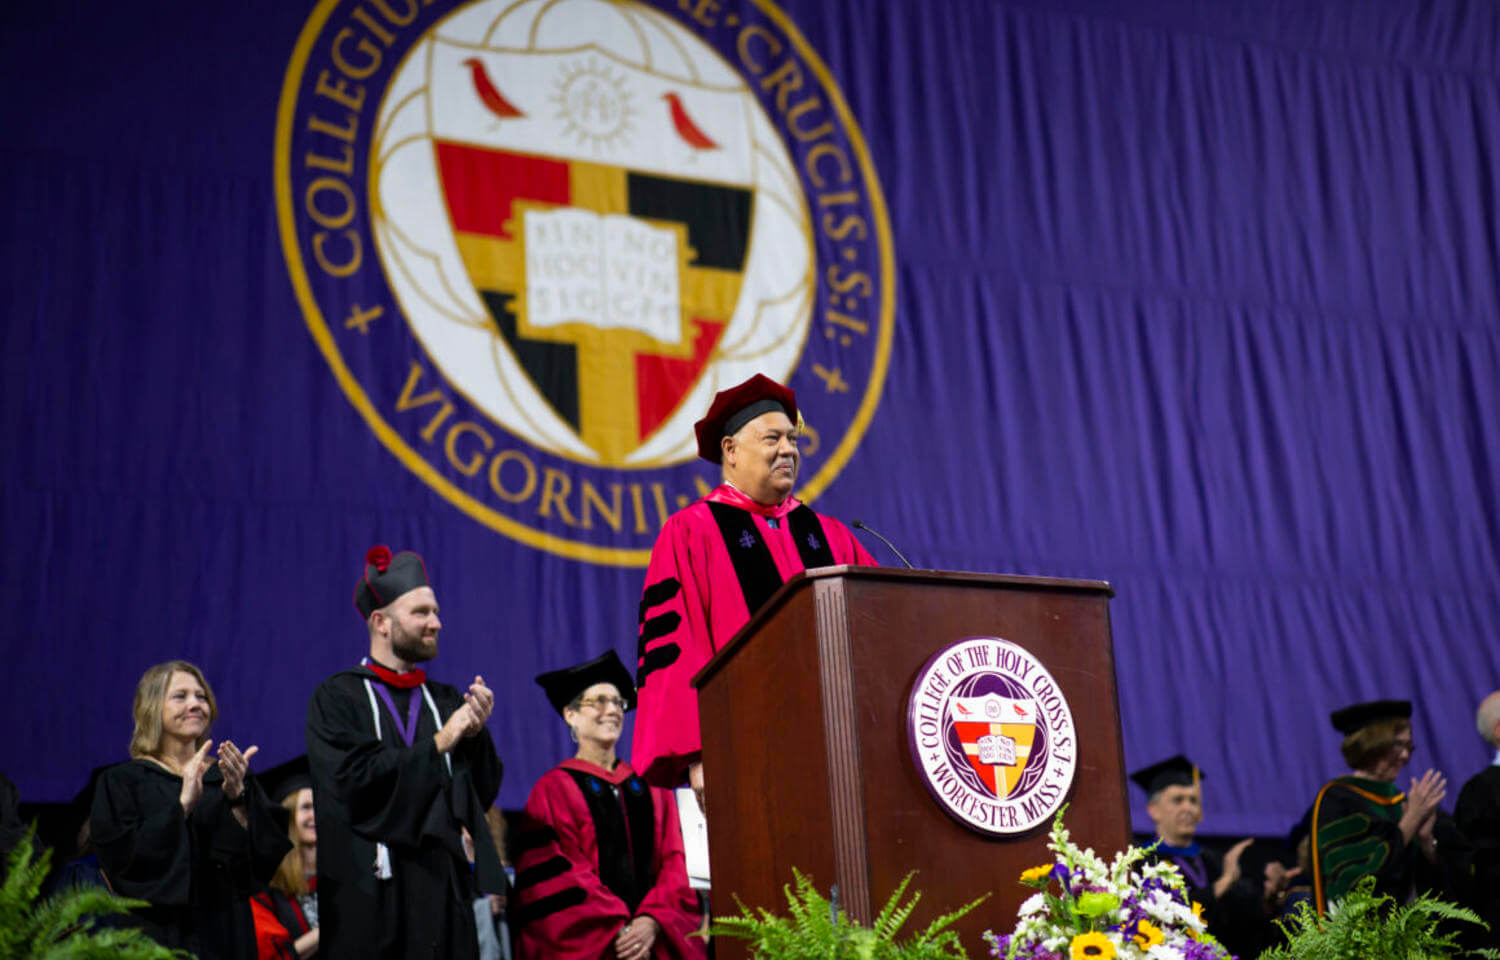 College of the Holy Cross President Vincent Rougeau greets attendees and graduates at the start of 2023 commencement exercises at the DCU Center on May 26, 2023 in Worcester, Massachusetts. (Photo by Michael Ivins/Holy Cross)